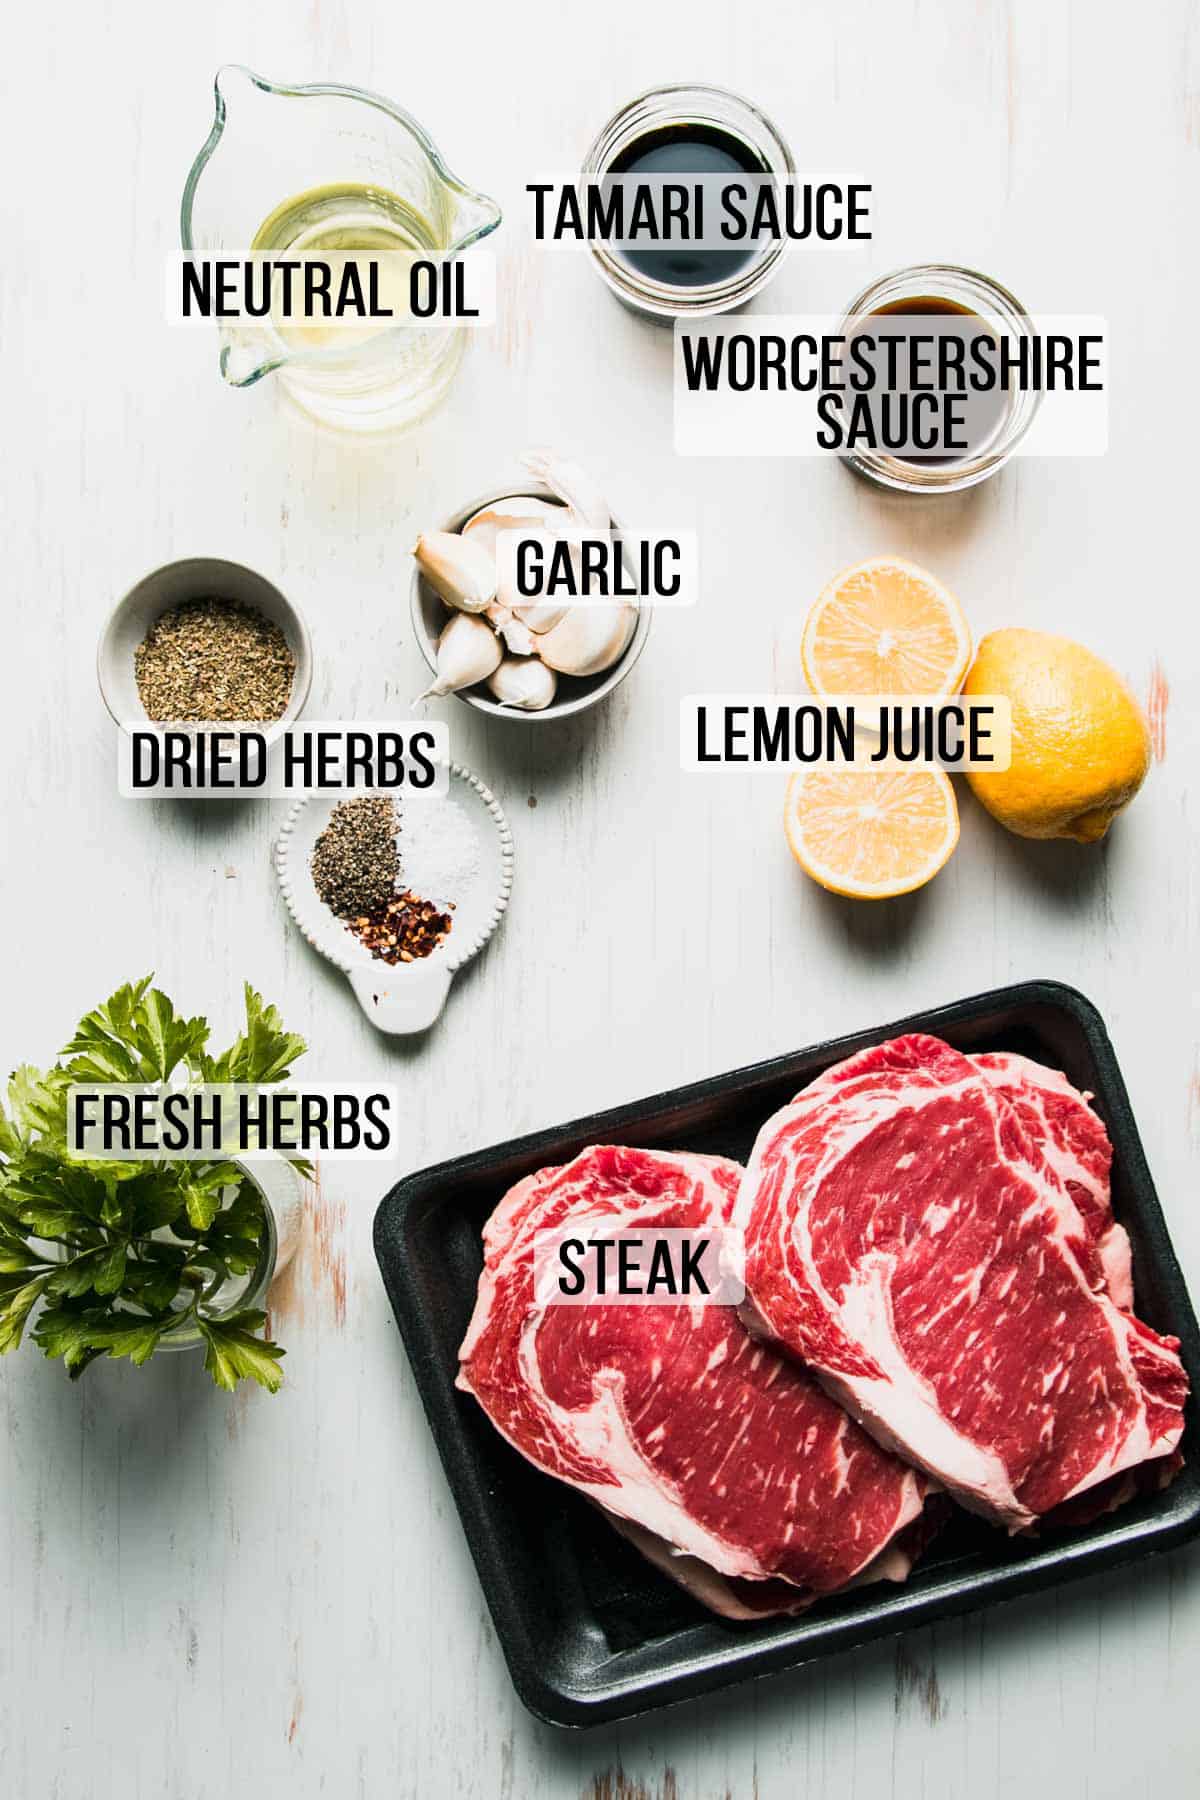 Ingredients for marinade and steak